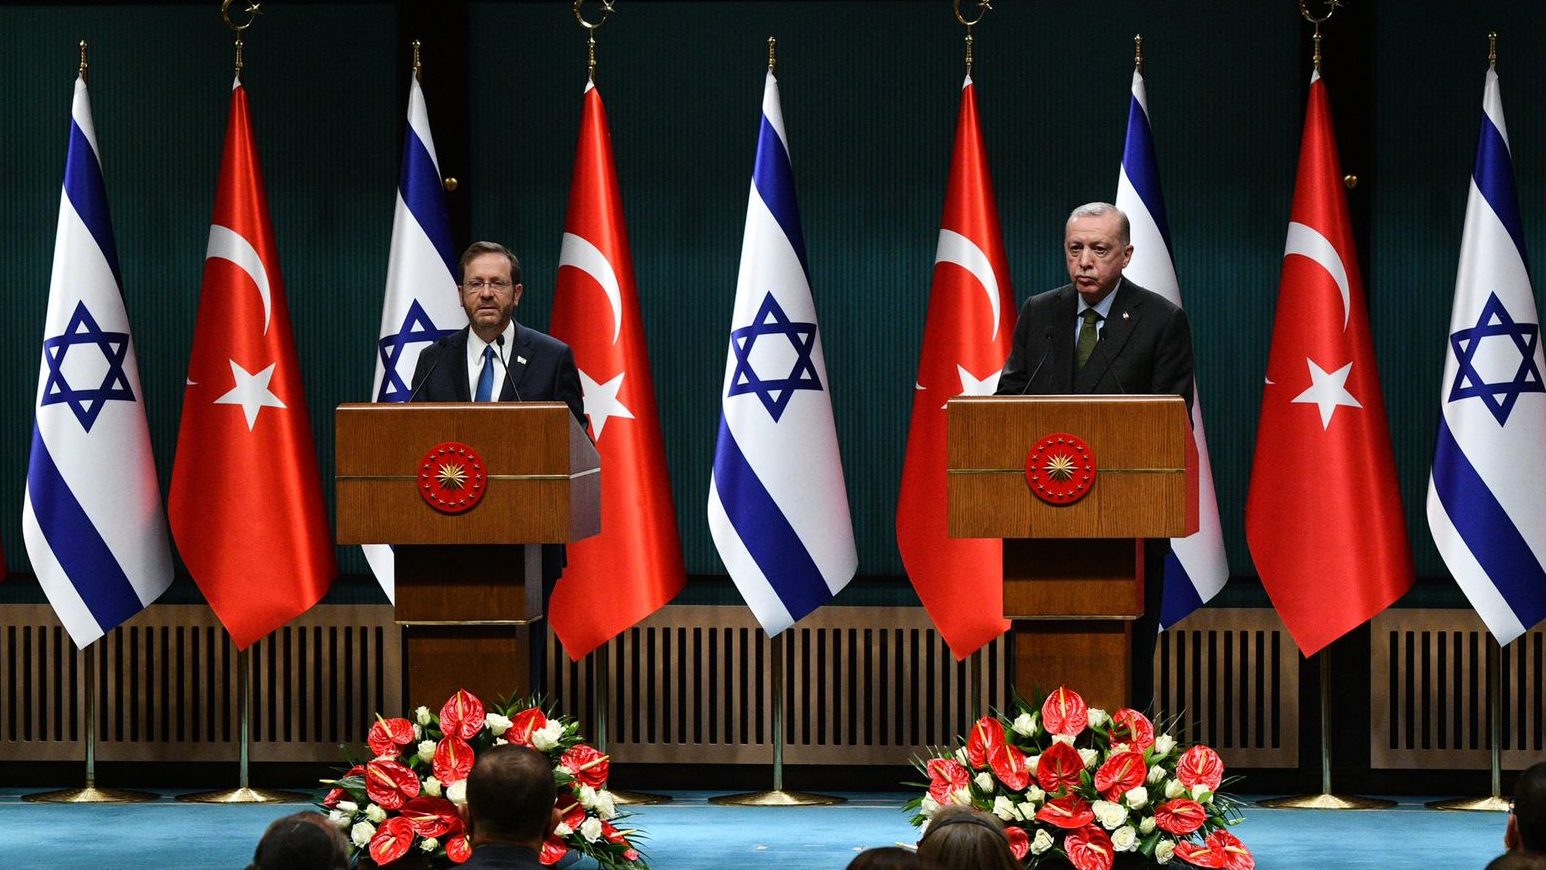 Israel, Turkey Repairing Ties Could Limit Russian Influence: Analysts